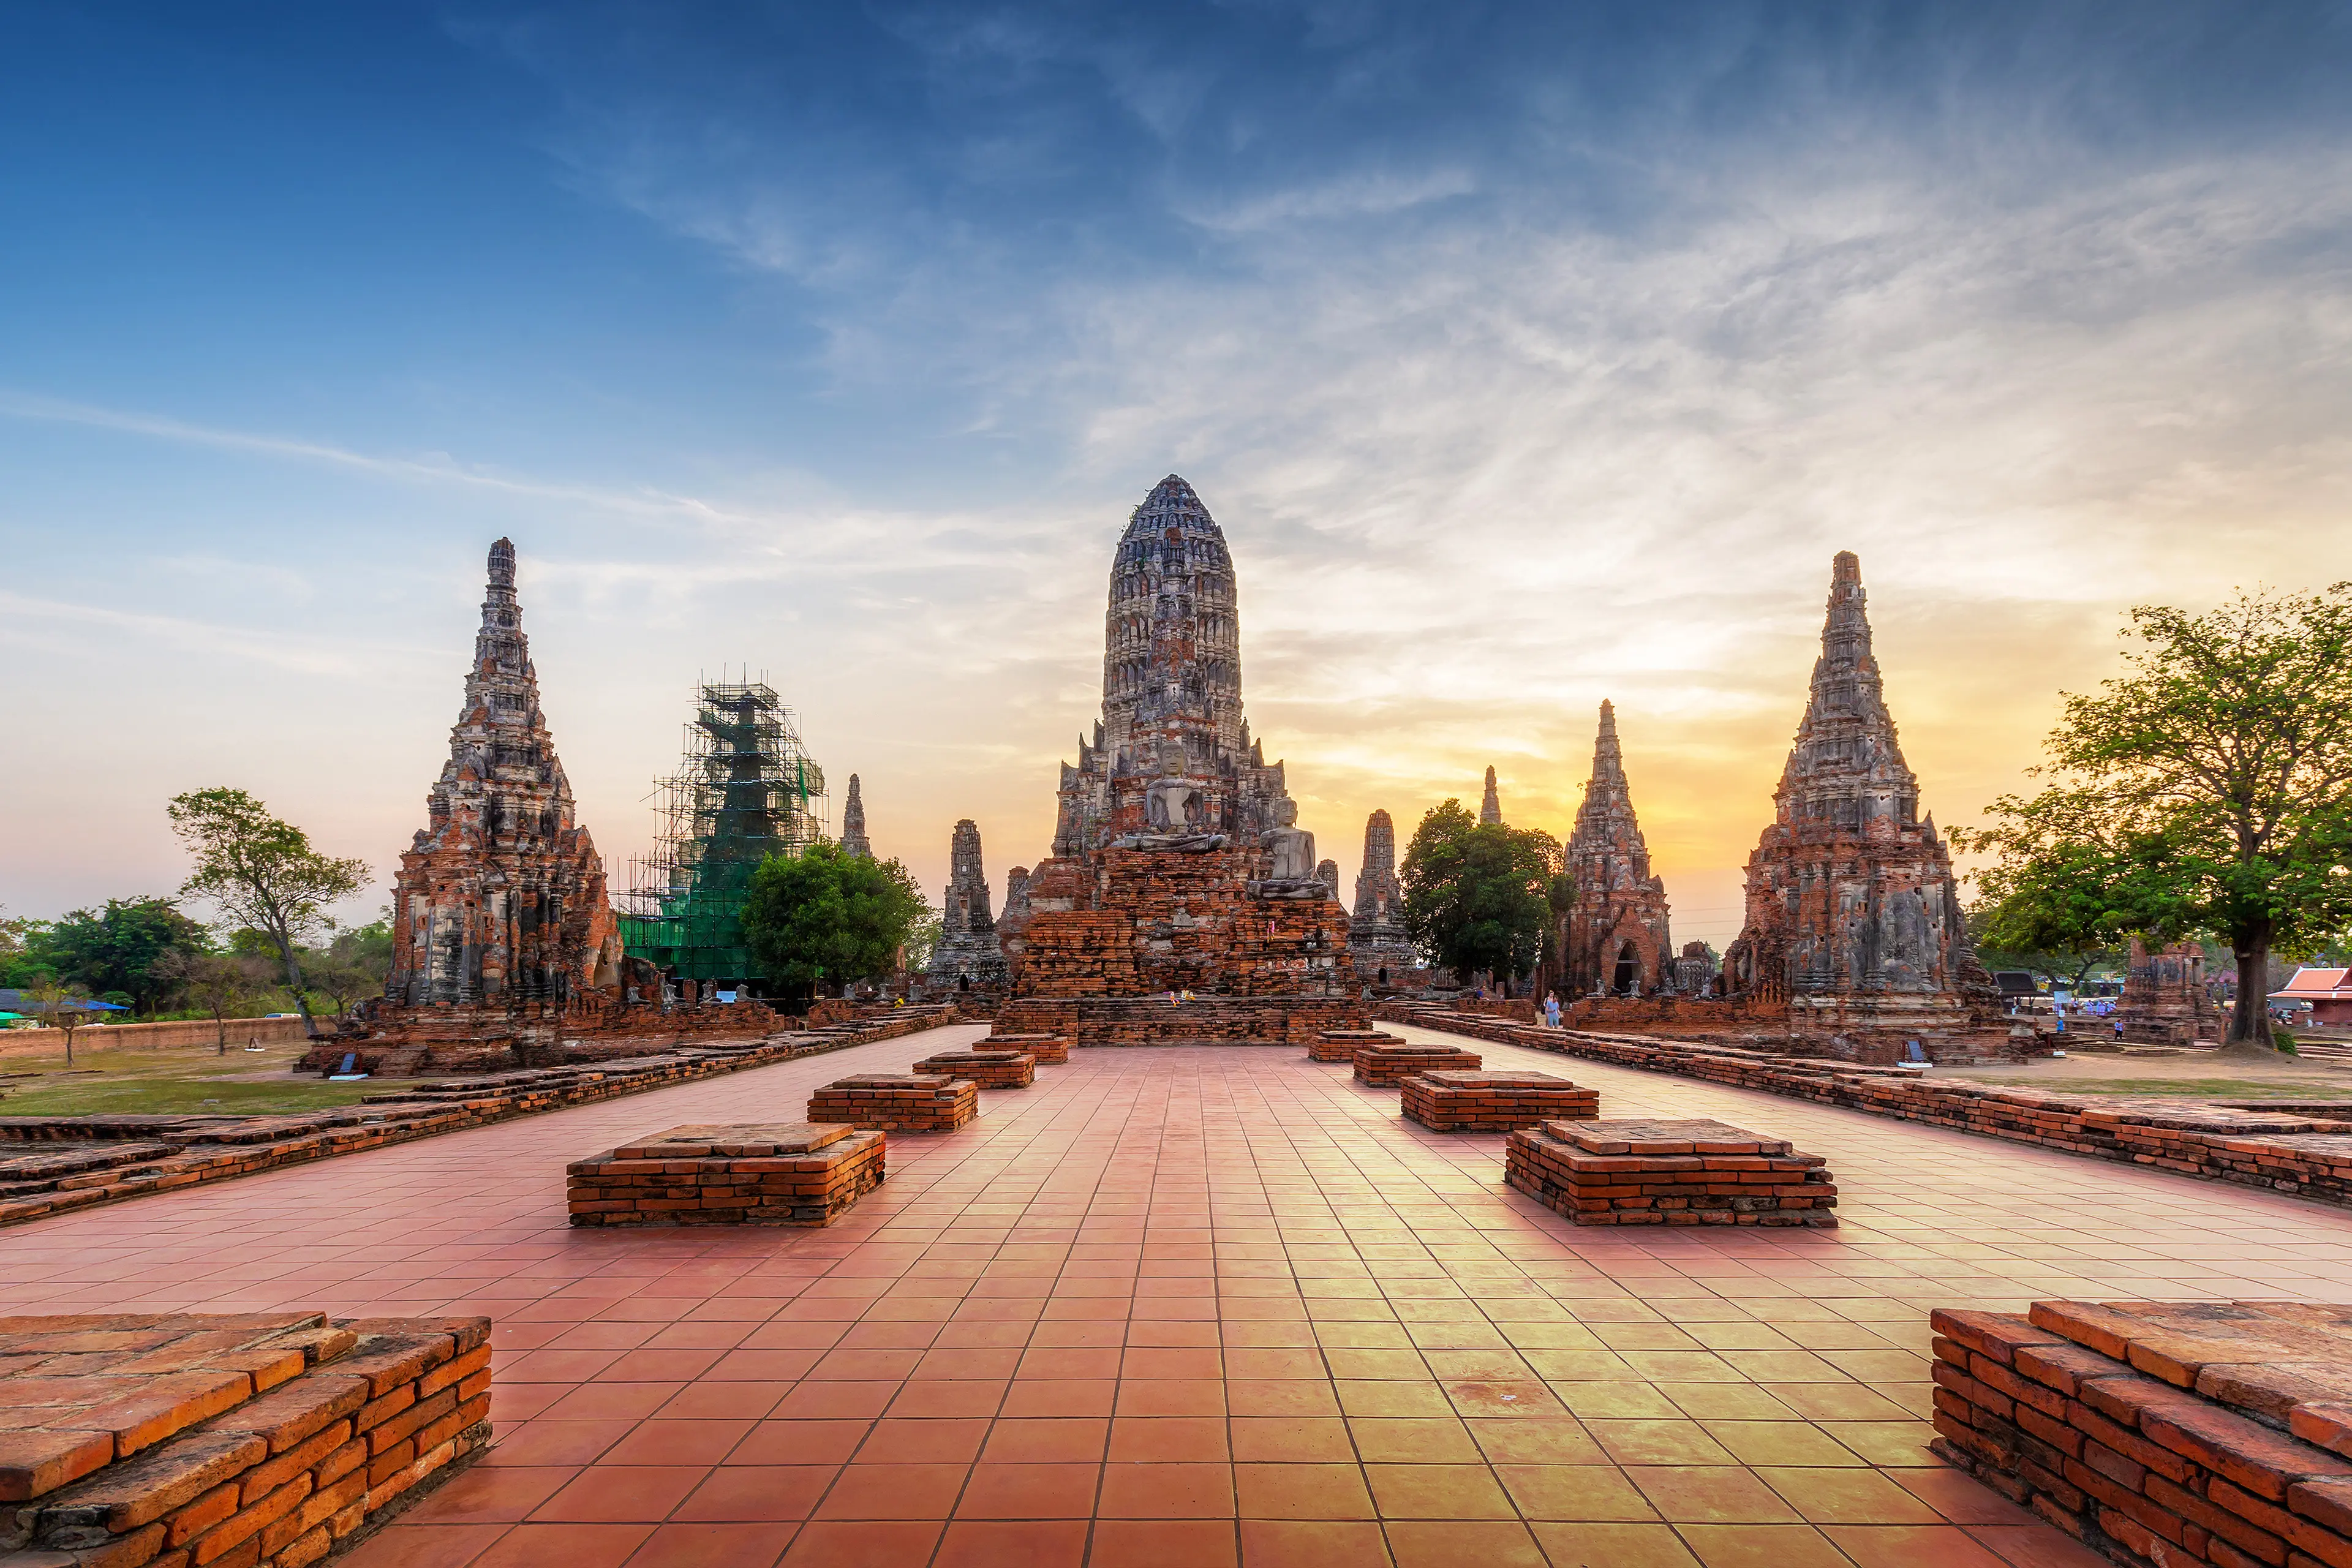 2-Day Food, Wine & Relaxation Adventure with Friends in Ayutthaya